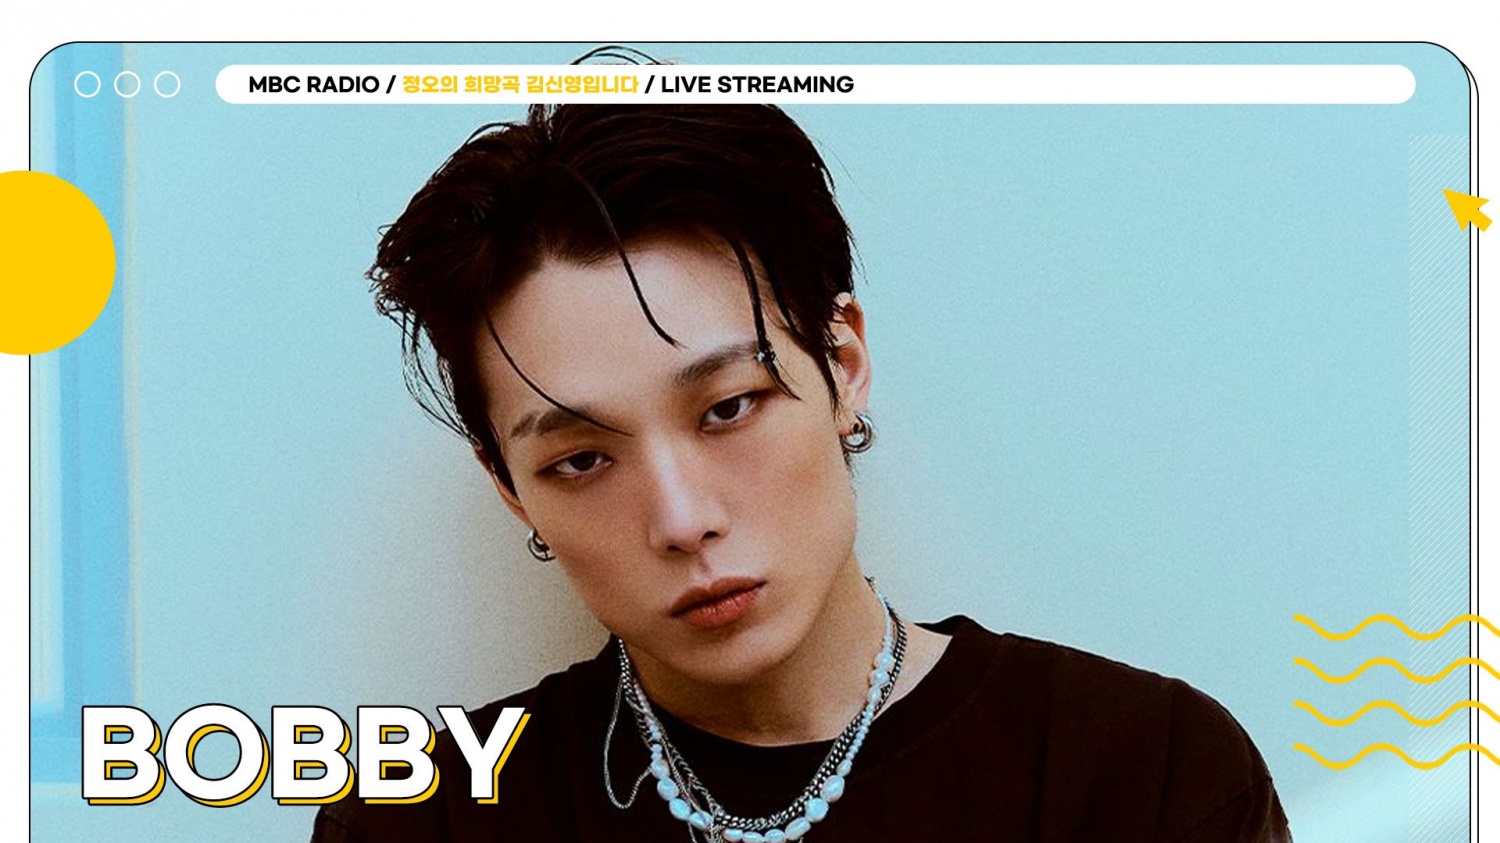 Bobby, solo song 'Drowning' #1 on iTunes... Proof of global popularity